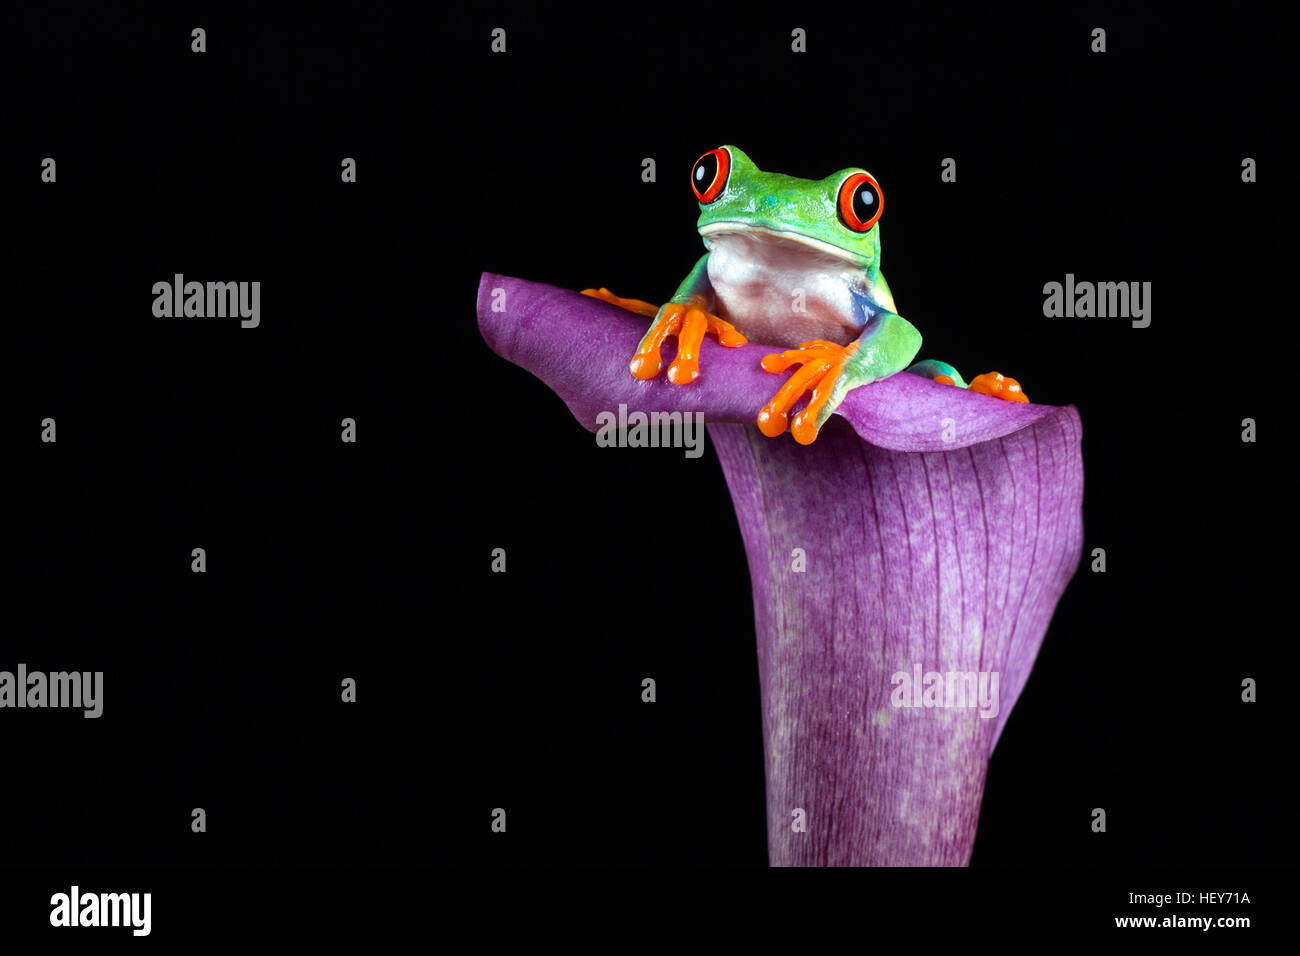 Red-eyed tree frog in purple flower Stock Photo